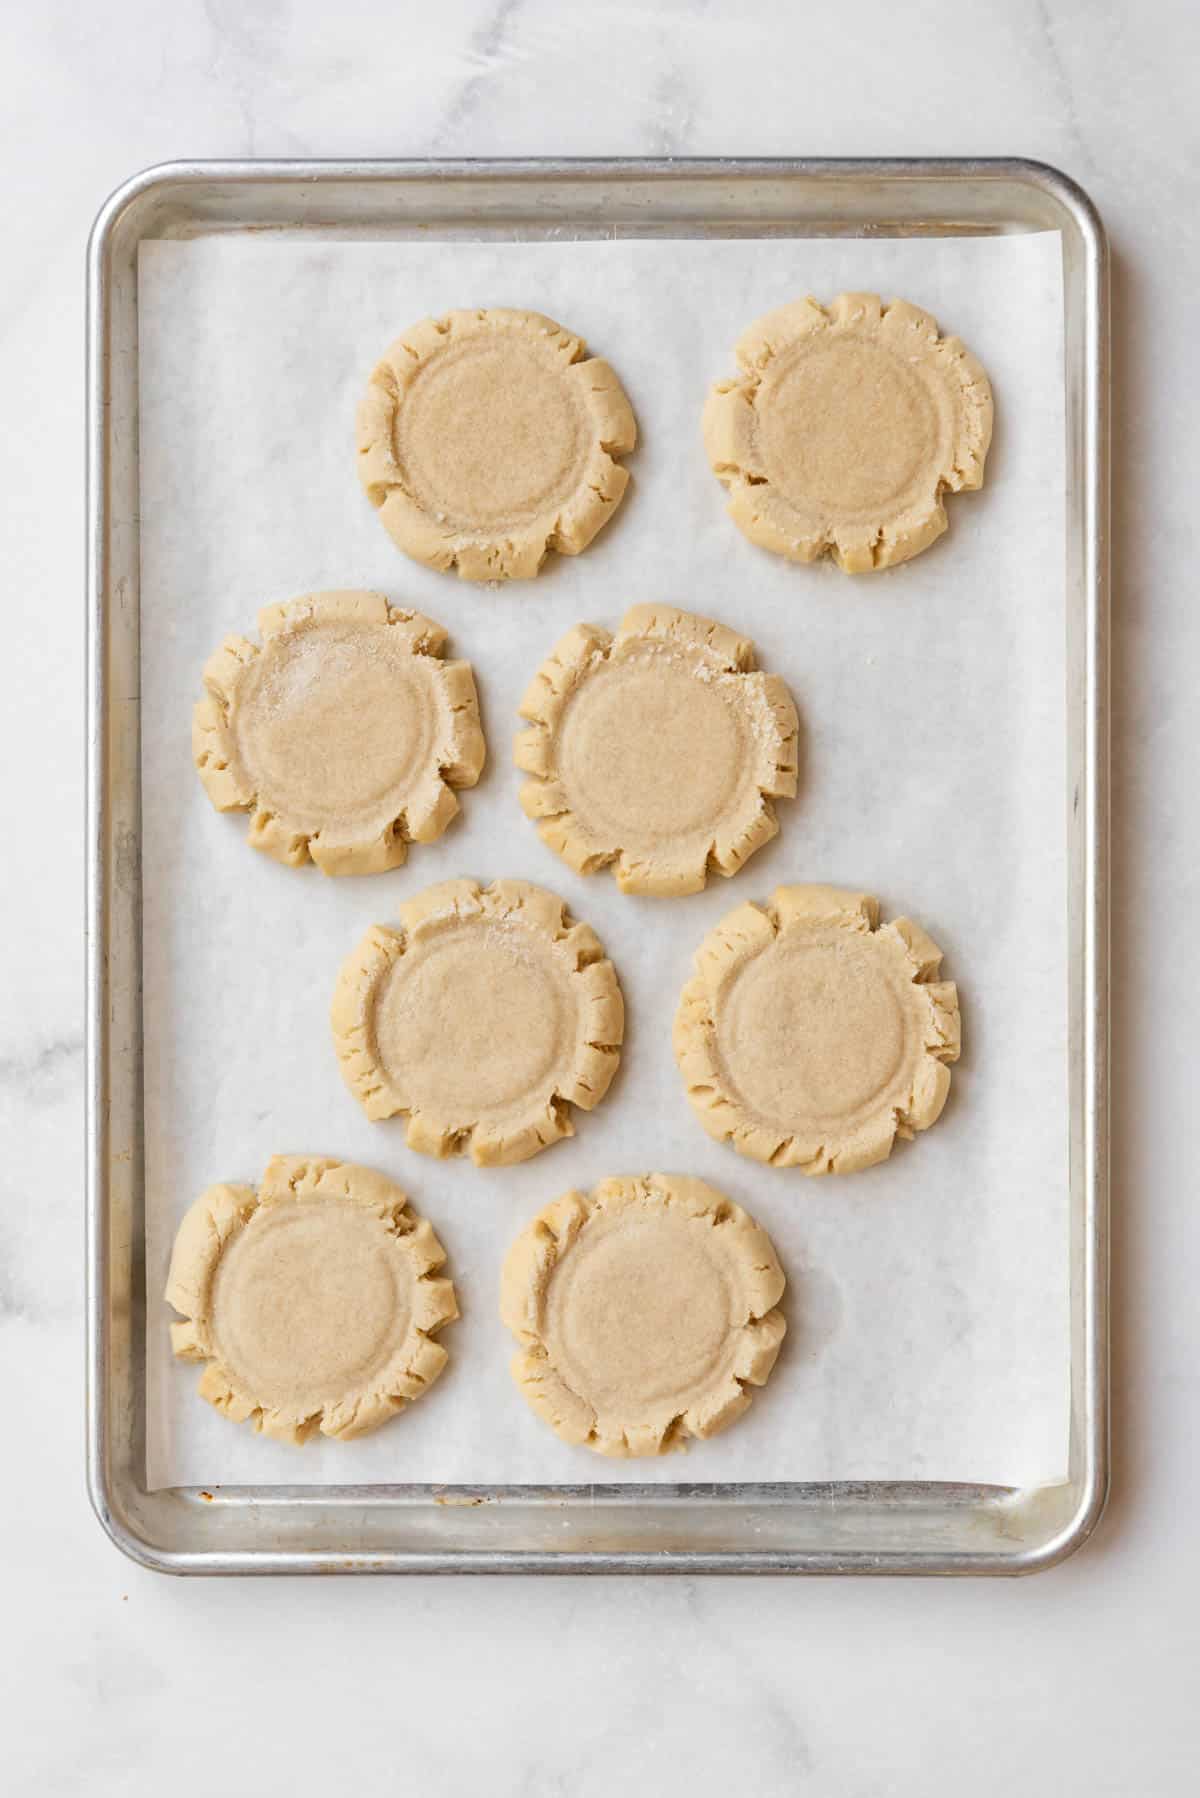 A baking sheet with eight round sugar cookies with jagged edges.